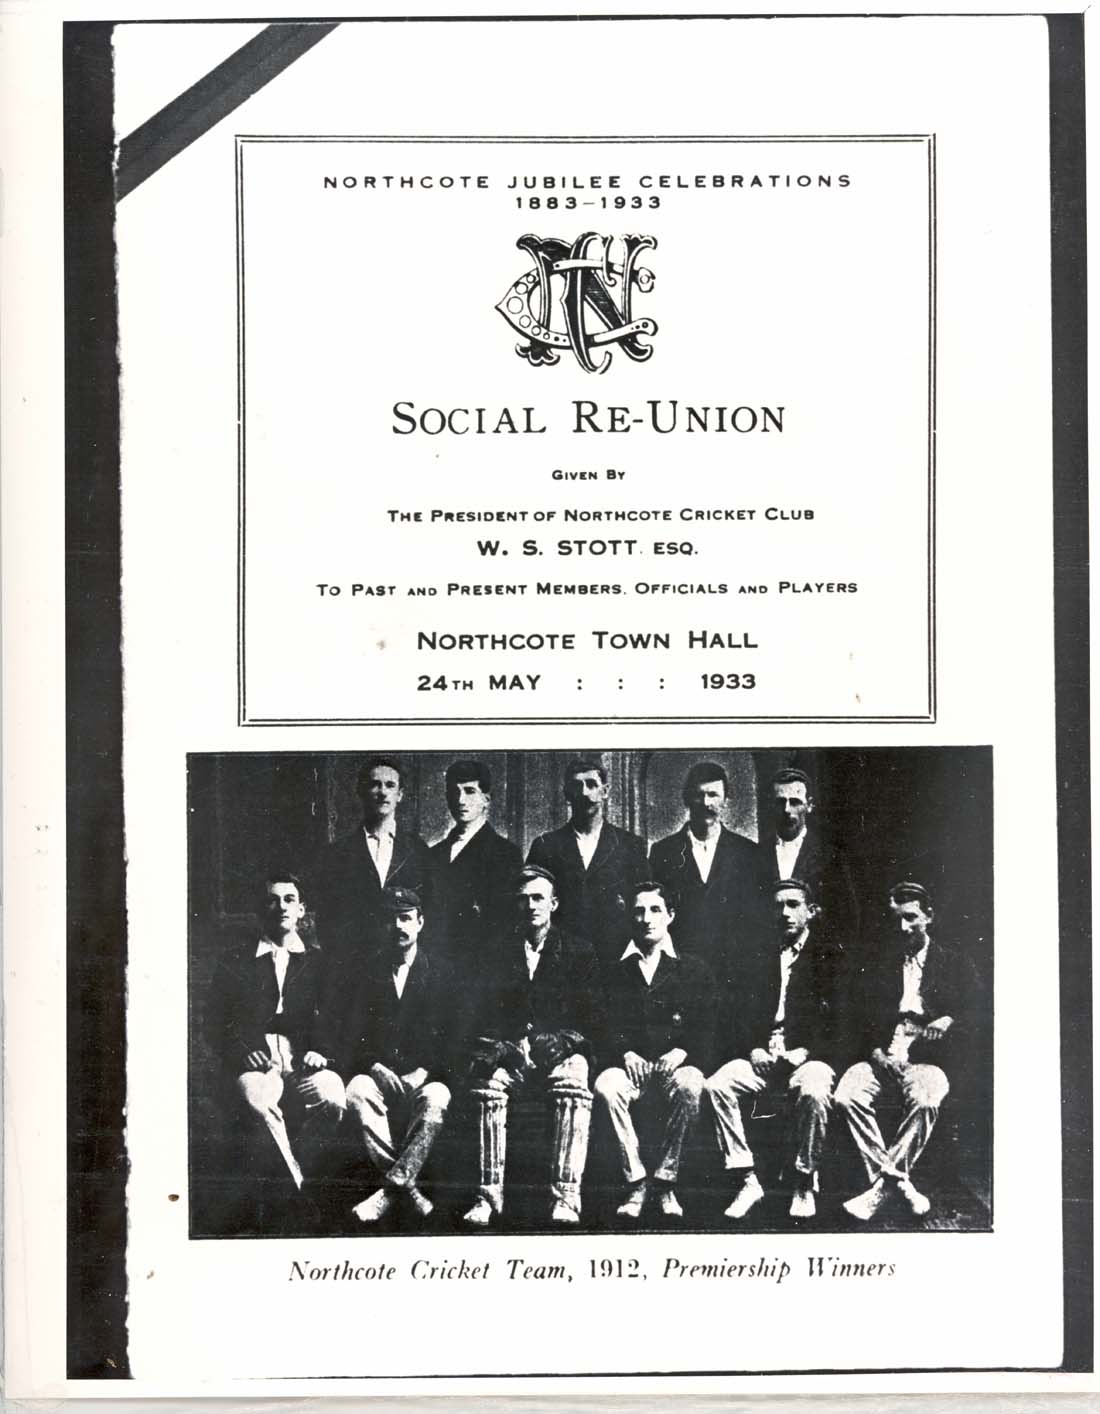 Image of Northcote Jubilee advertisement for a social reunion of past and present members of Northcote Cricket Club. Featured is the 1912 Premiership team